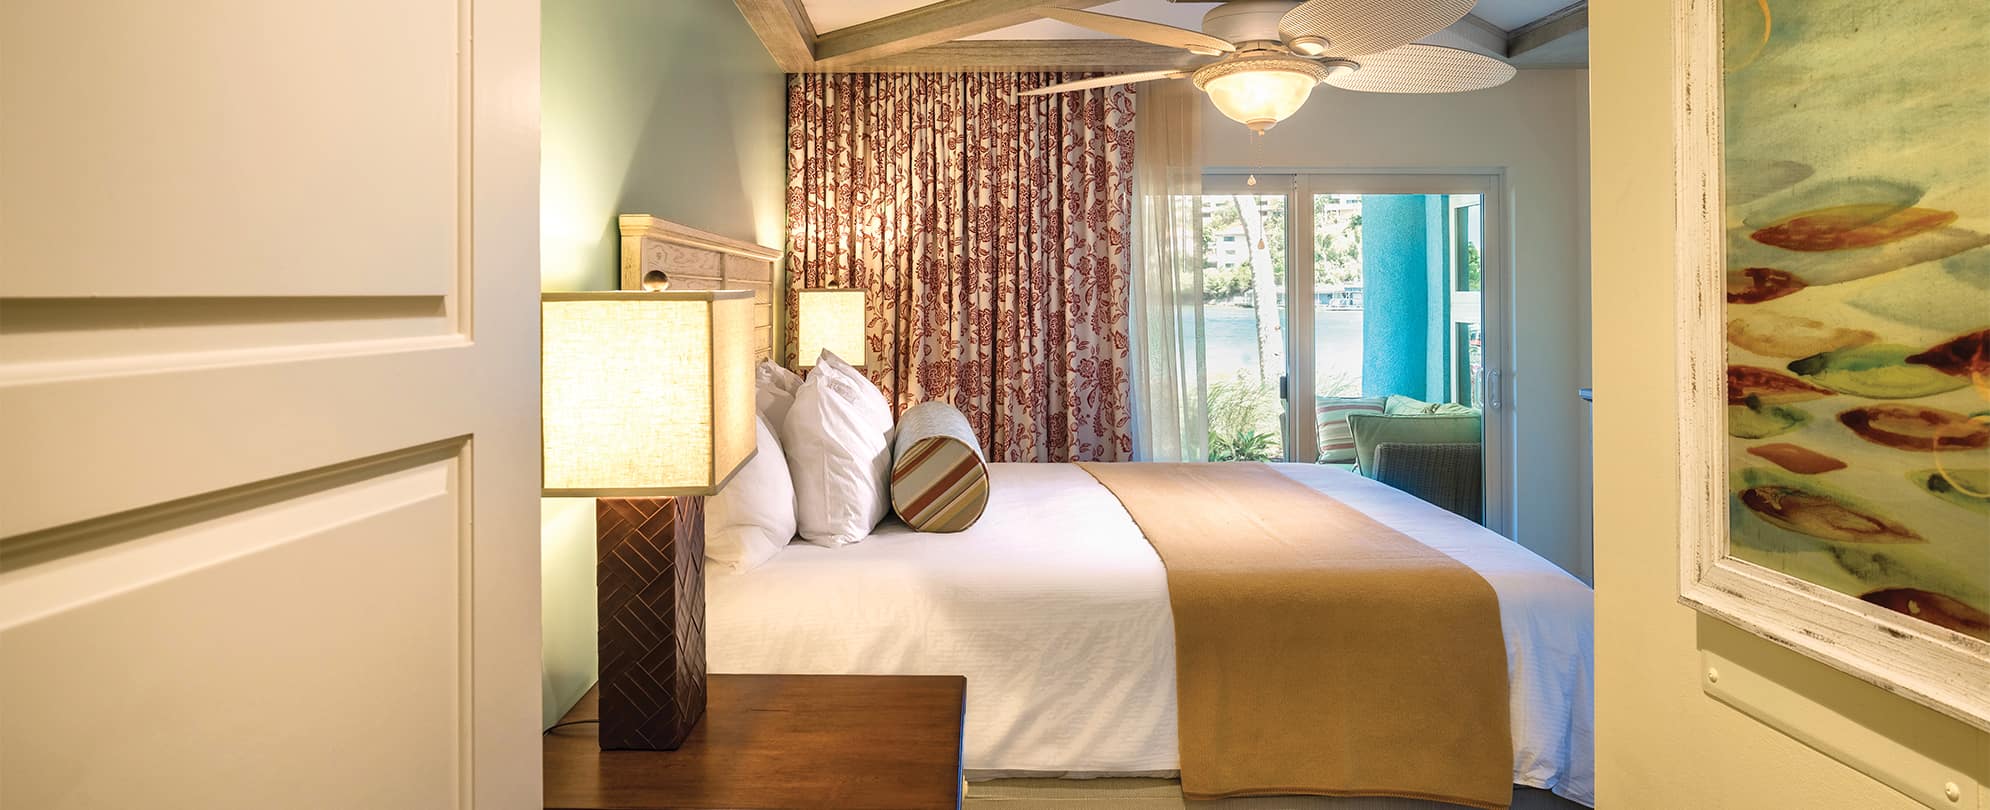 Bed with white linens and tan blanket in a Presidential Reserve suite at Margaritaville Vacation Club by Wyndham - St. Thomas.